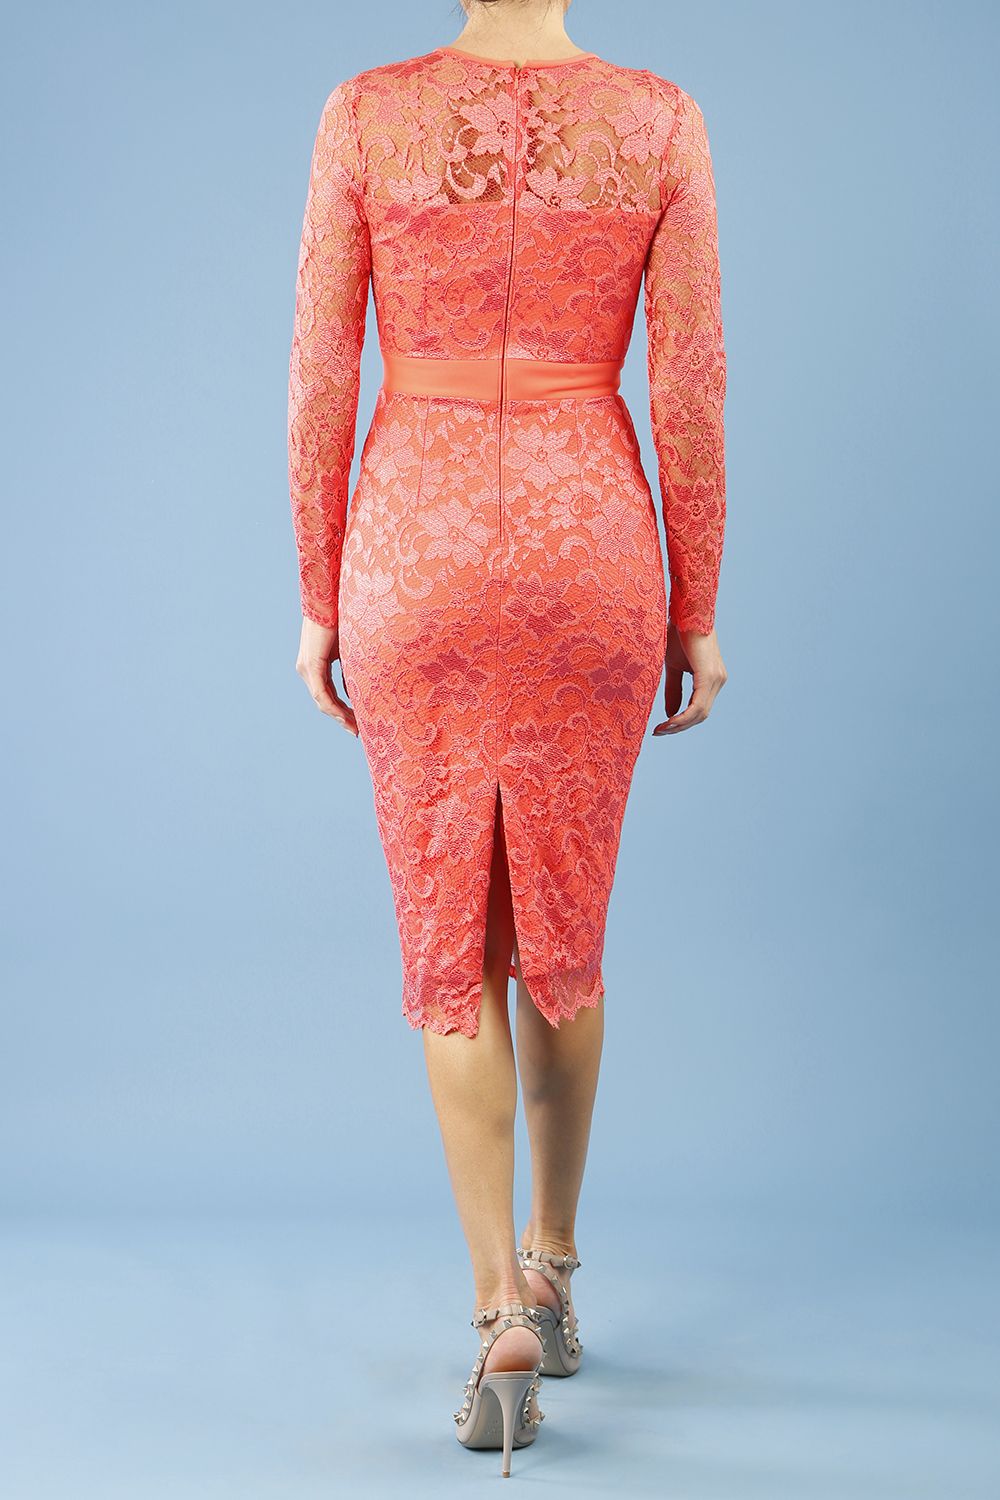 Model wearing the Diva Cherrie Lace Pencil dress with long sleeves and round neck in hot coral back